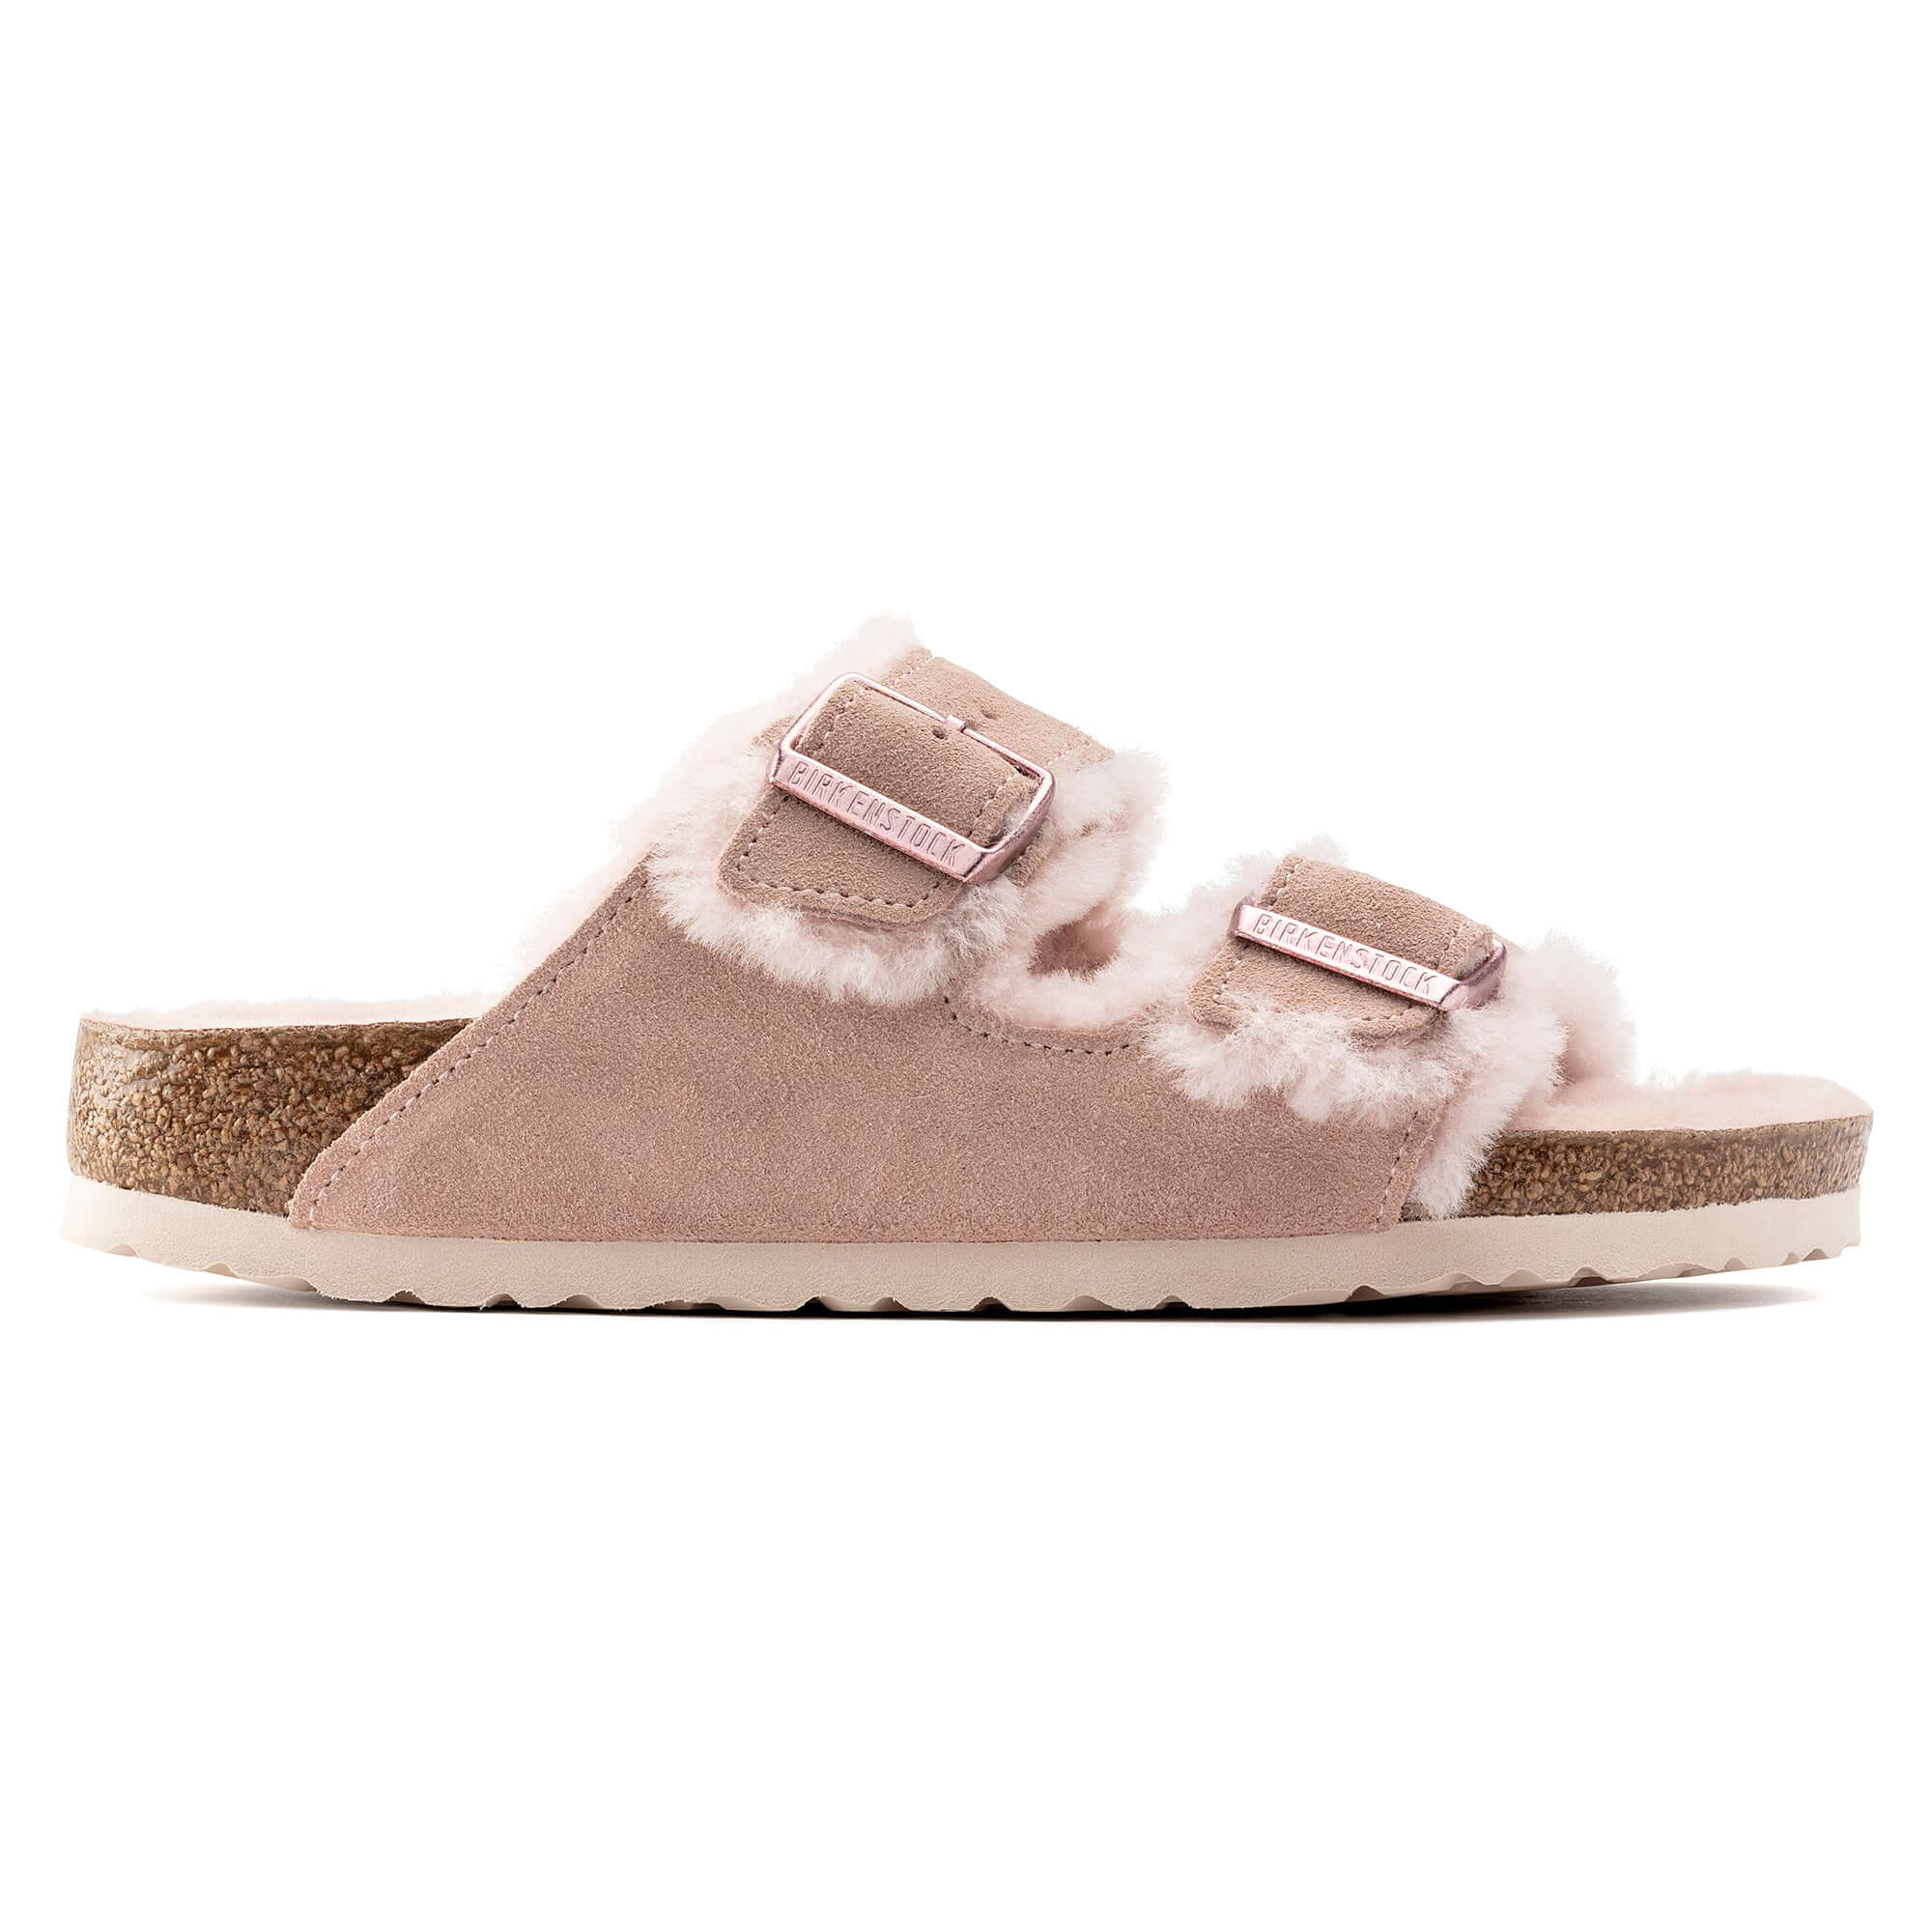 Pink suede slip-on sandal with fluffy shearling lining and buckle straps on cork sole.